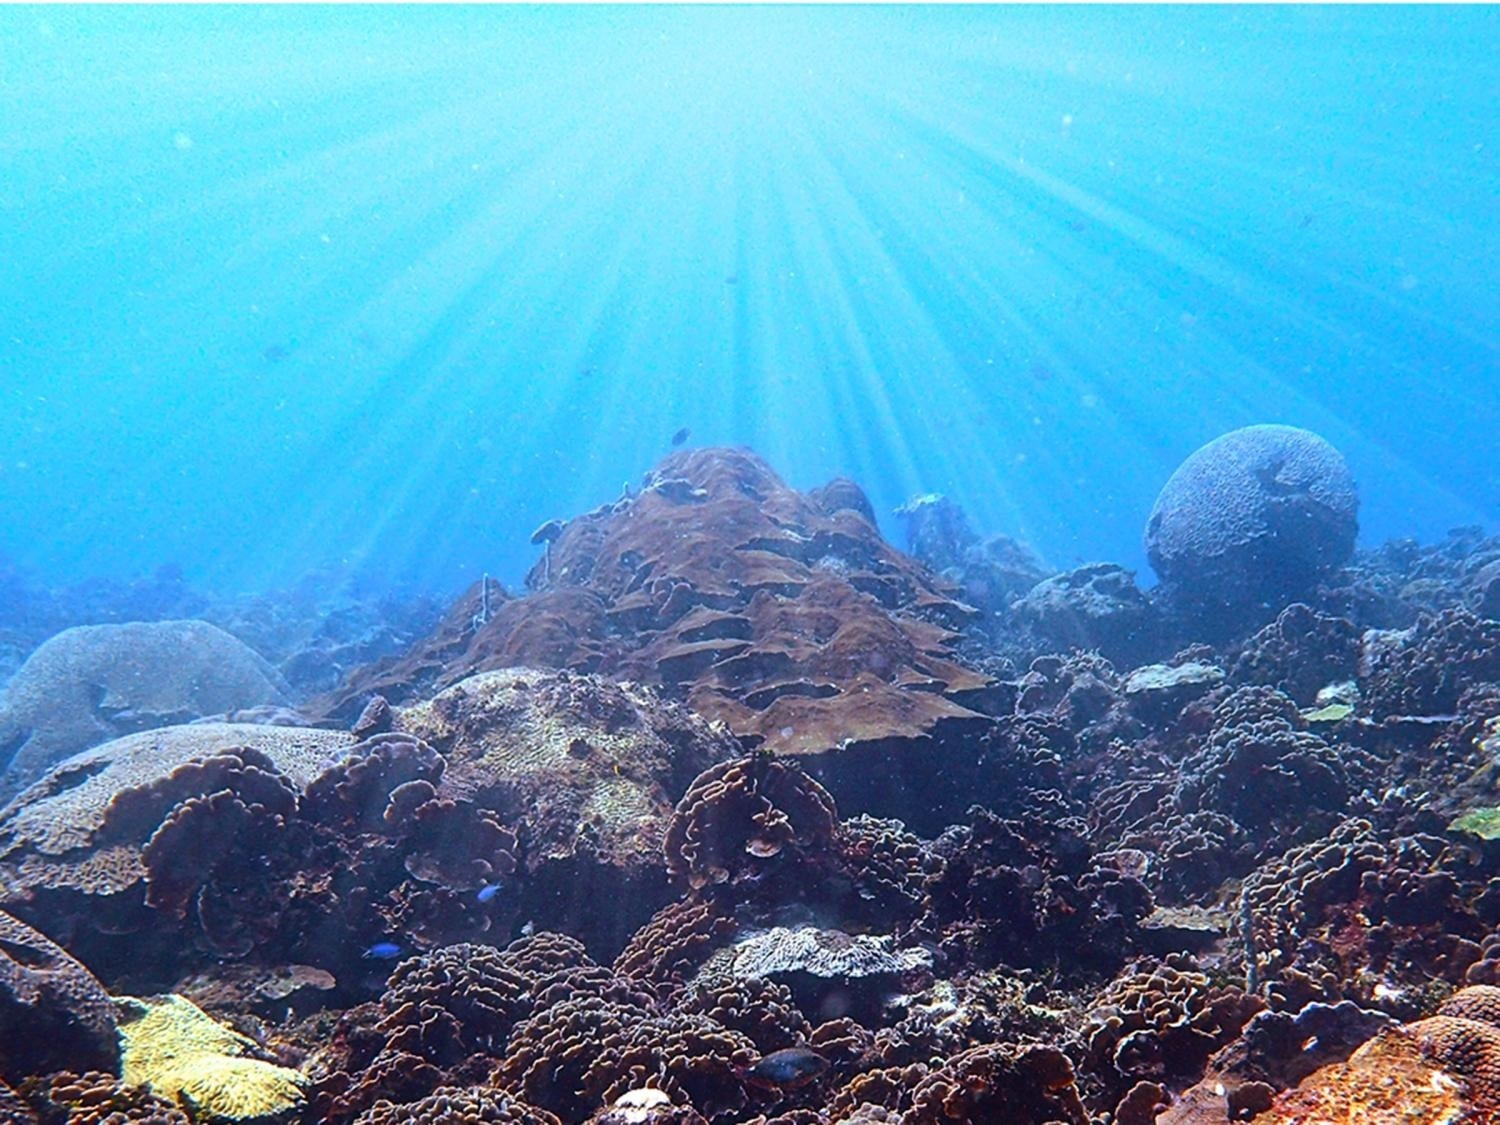 Sunlight Exposure Aids the Survival of Corals Worldwide